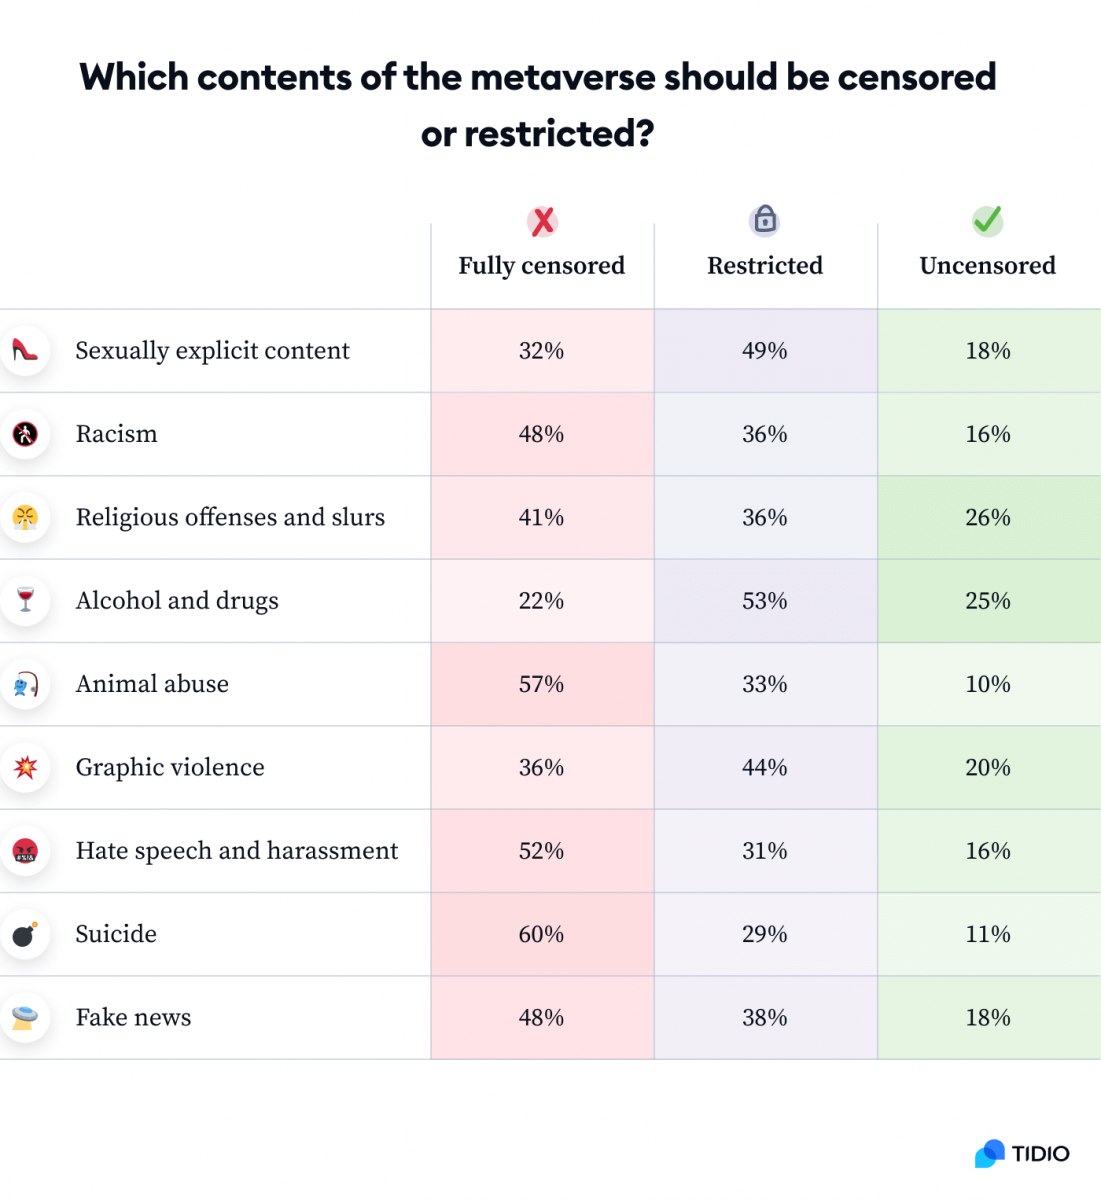 An infographic presenting a table about which contents of the metaverse should be censored or restricted based on the respondents answers